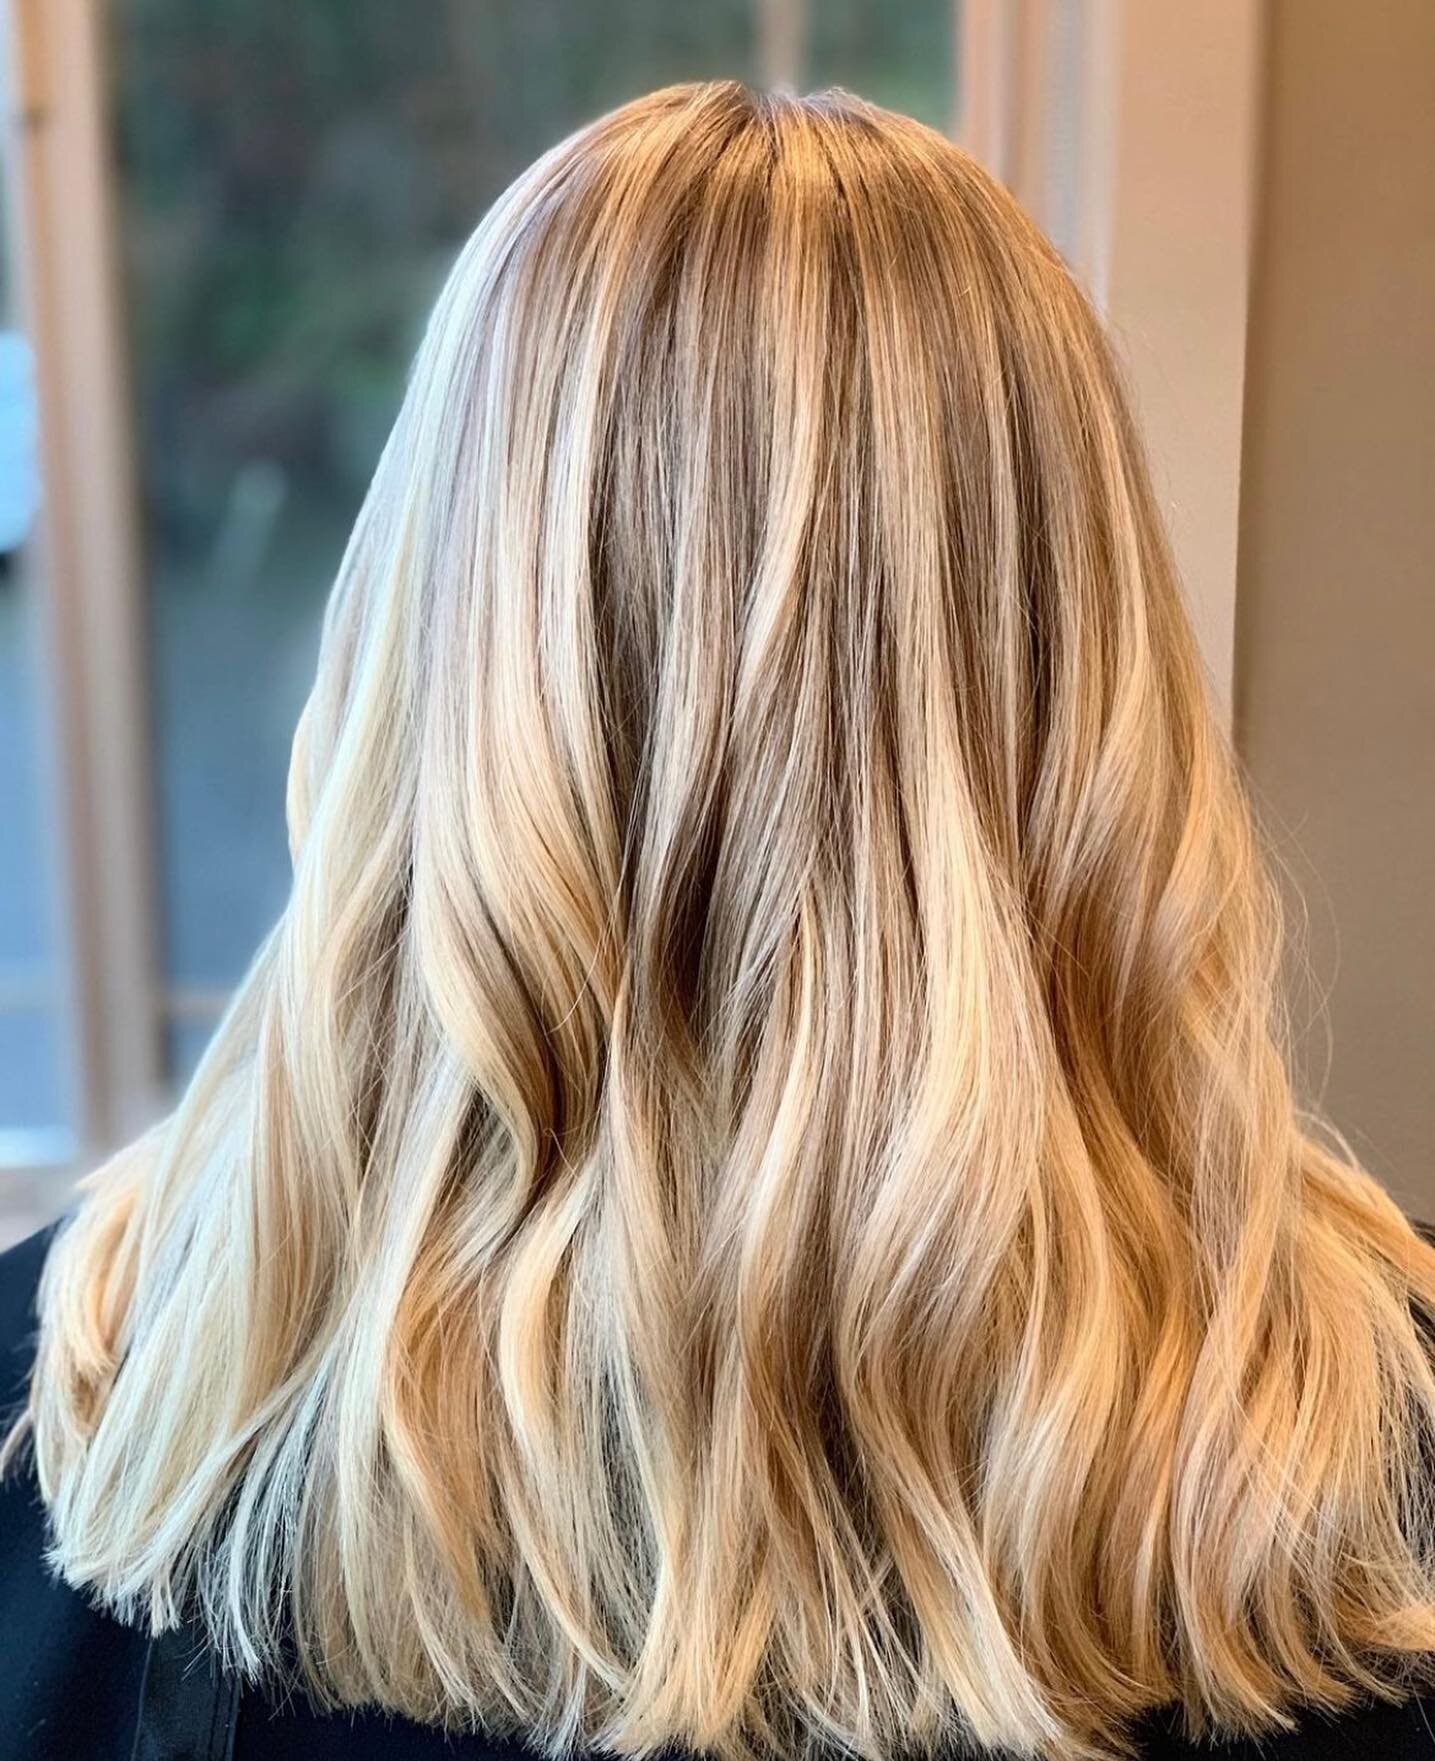 A friendly reminder to prebook your appointments so you can make sure you get in when you need to. 🤗

It&rsquo;s not unusual for stylists to be booked 6-8 weeks out especially for longer appointments. 🗓 

This stunning blonde was done by @ashmarie_